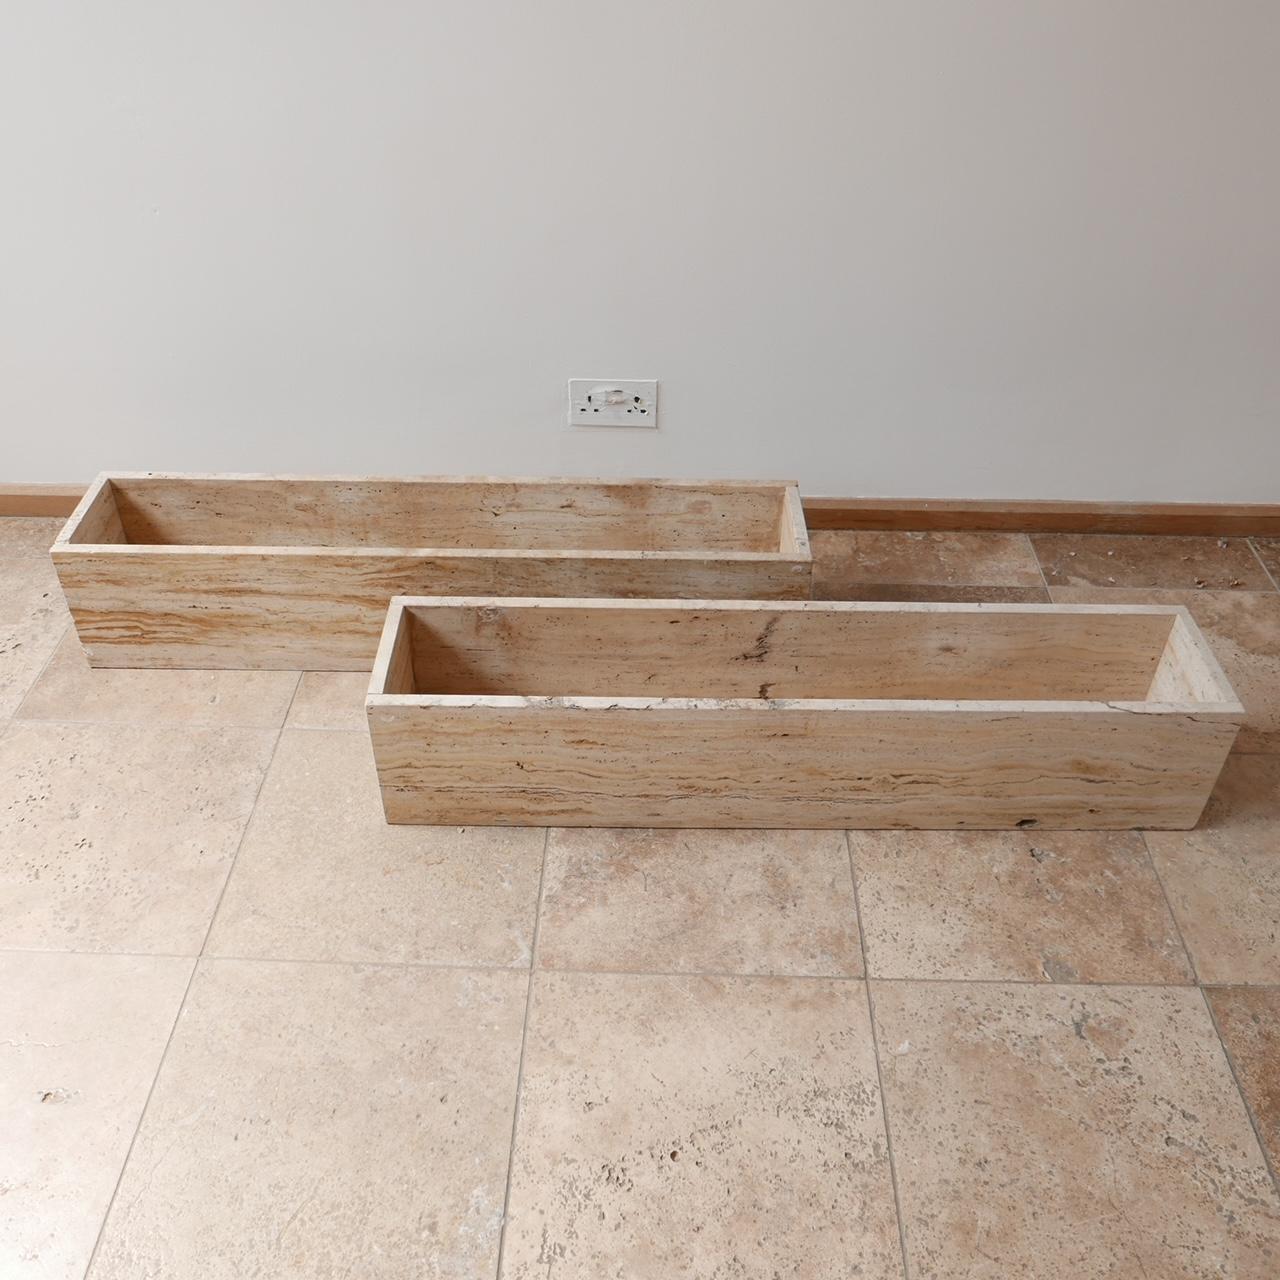 A pair of stylish travertine planters.

Belgium, c1970s.

Solid travertine construction.

Good condition, one or two chips commensurate with age.

Price is for the pair.

Location: London Gallery.

Dimensions: 110 W x 22 D x 22 H in cm.

Delivery: